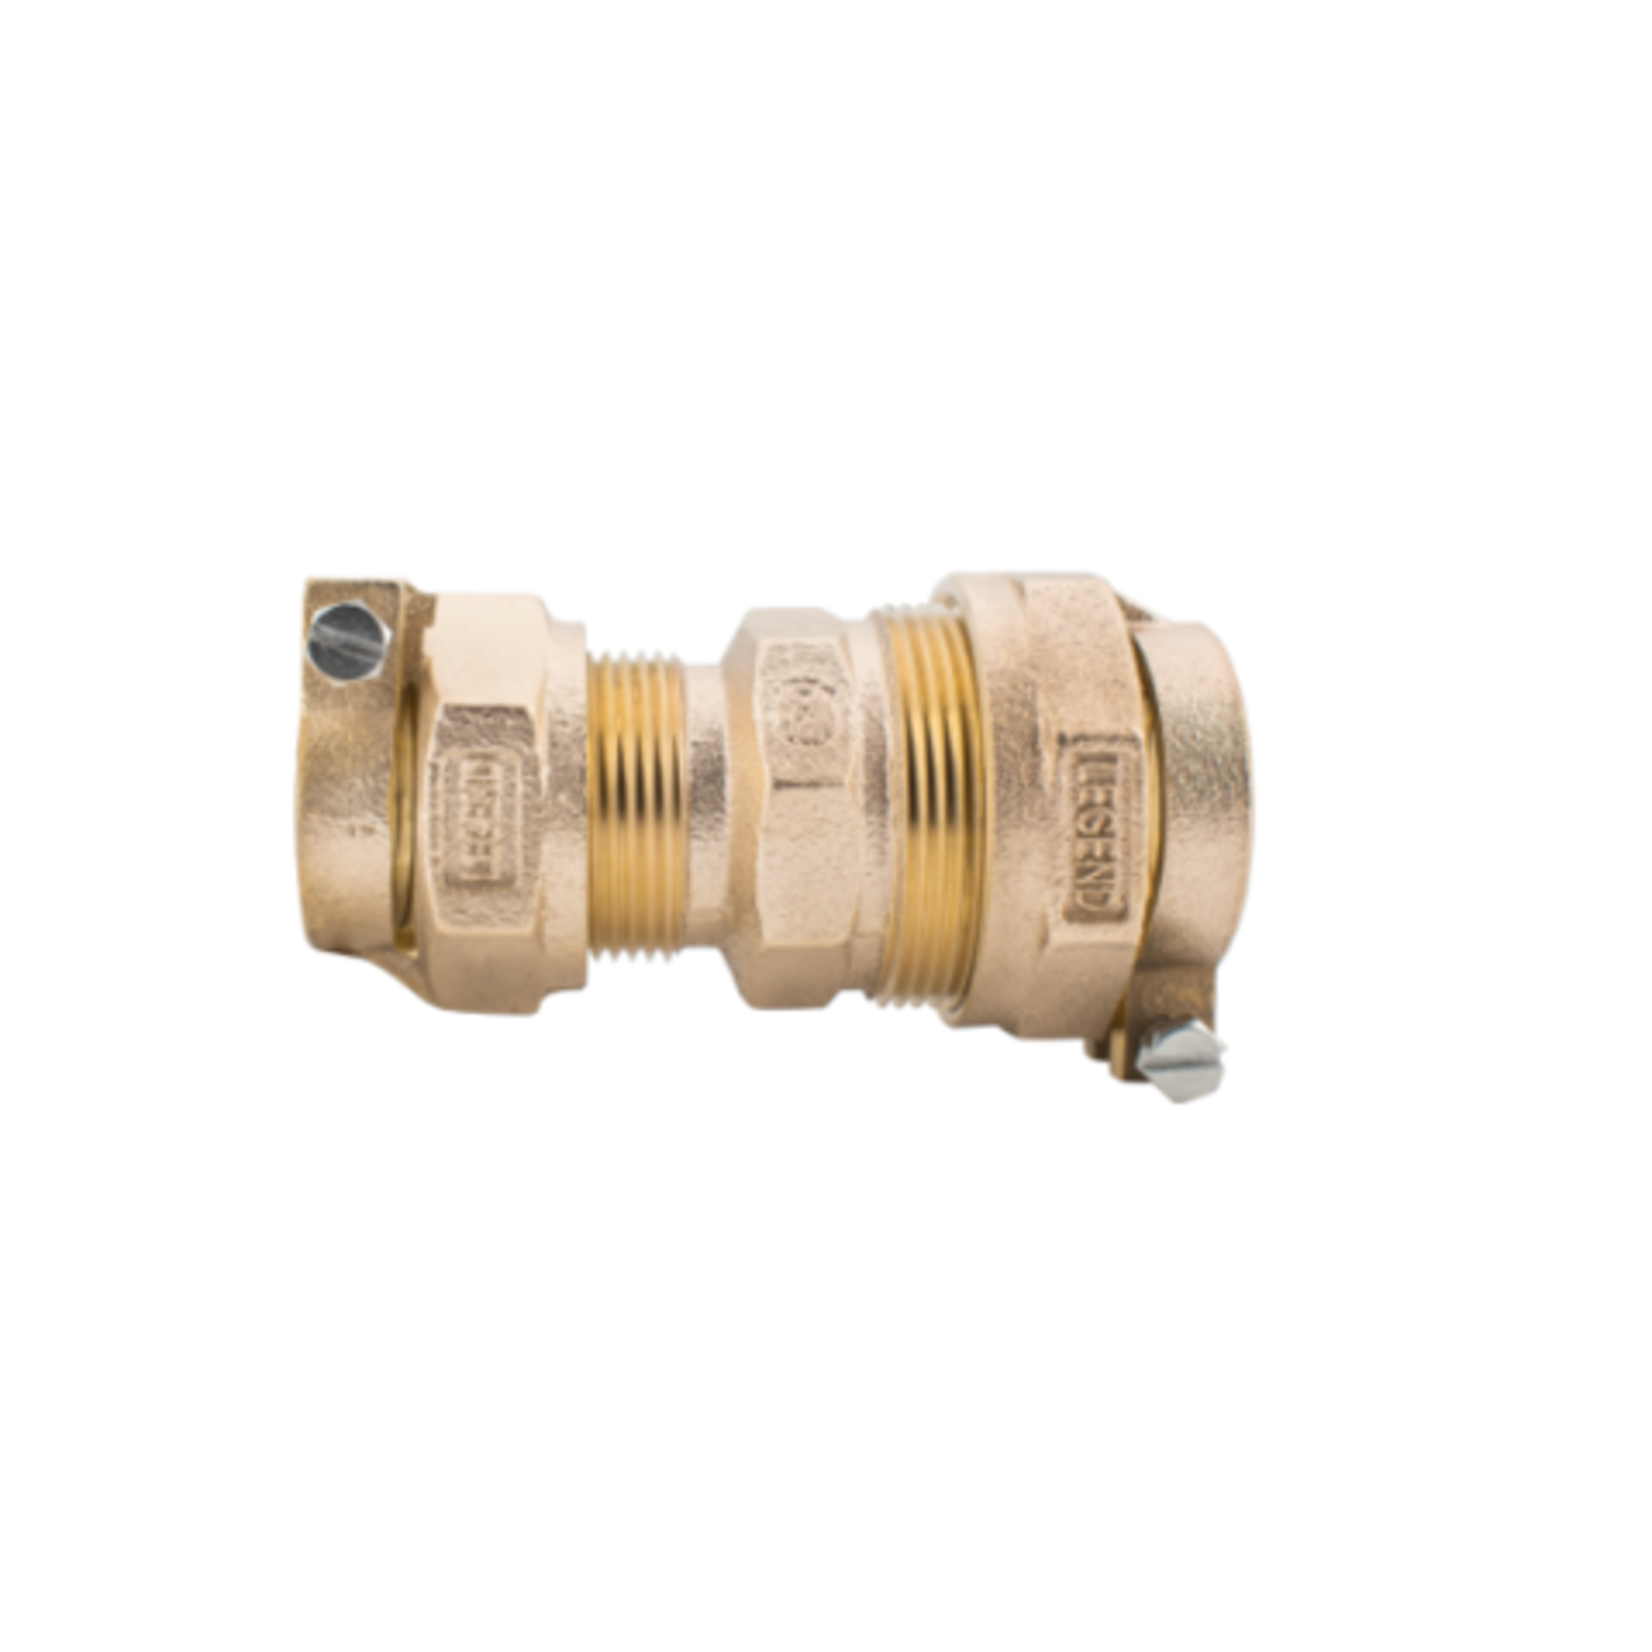 LEGEND VALVE 1 IN PACK JOINT (IPS) X 3/4 IN PACK JOINT (CTS) UNION - T-4325NL (IPS X CTS)